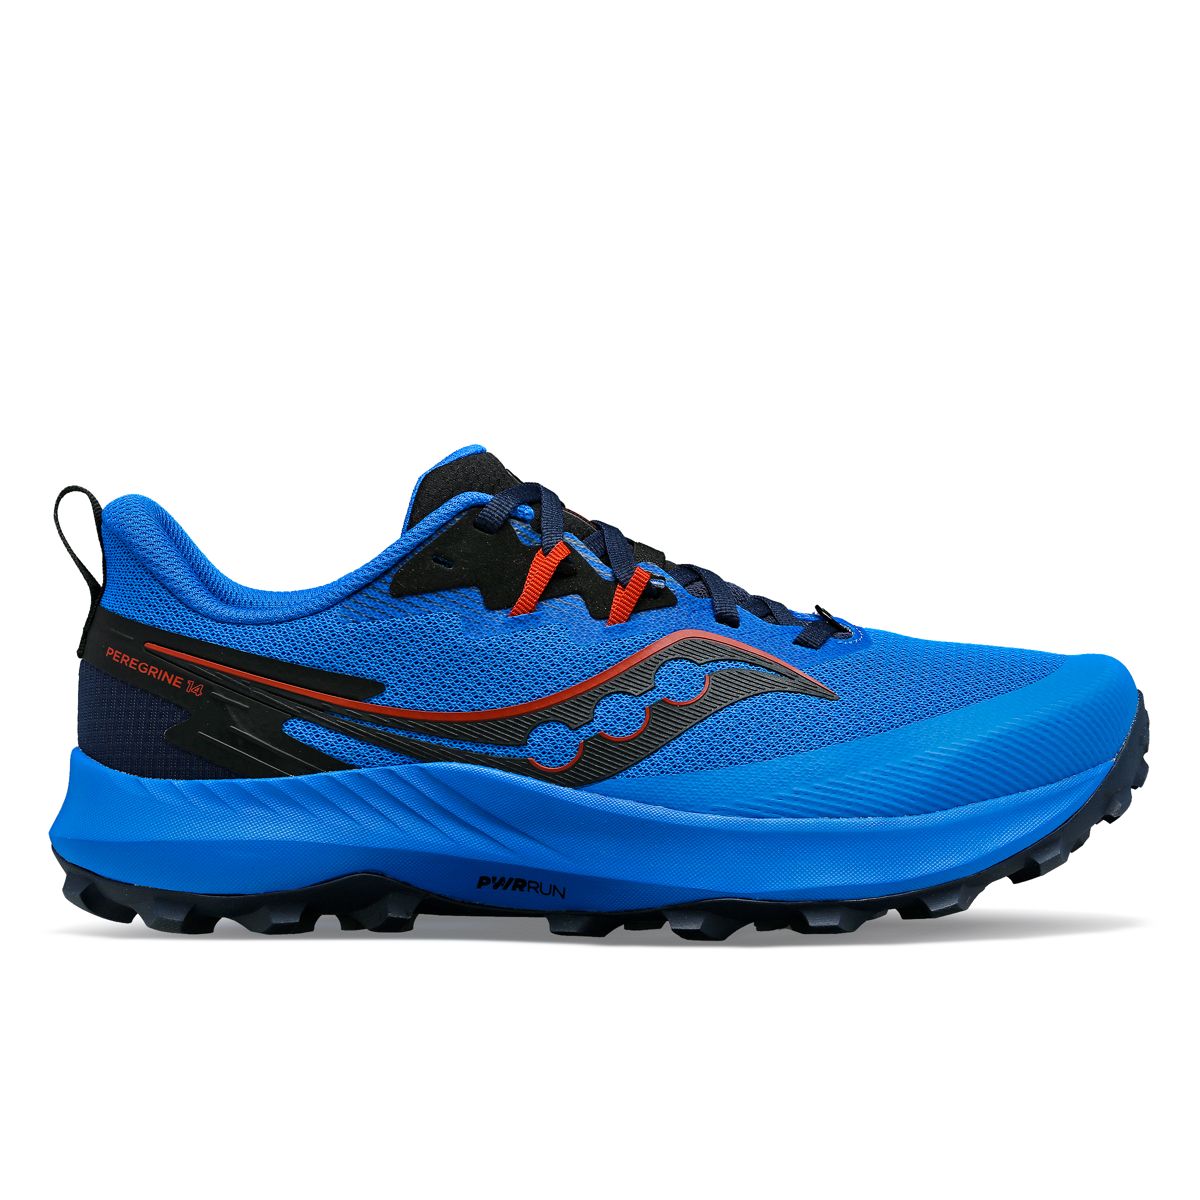 Men's Peregrine 14 Trail Running Shoes | Saucony